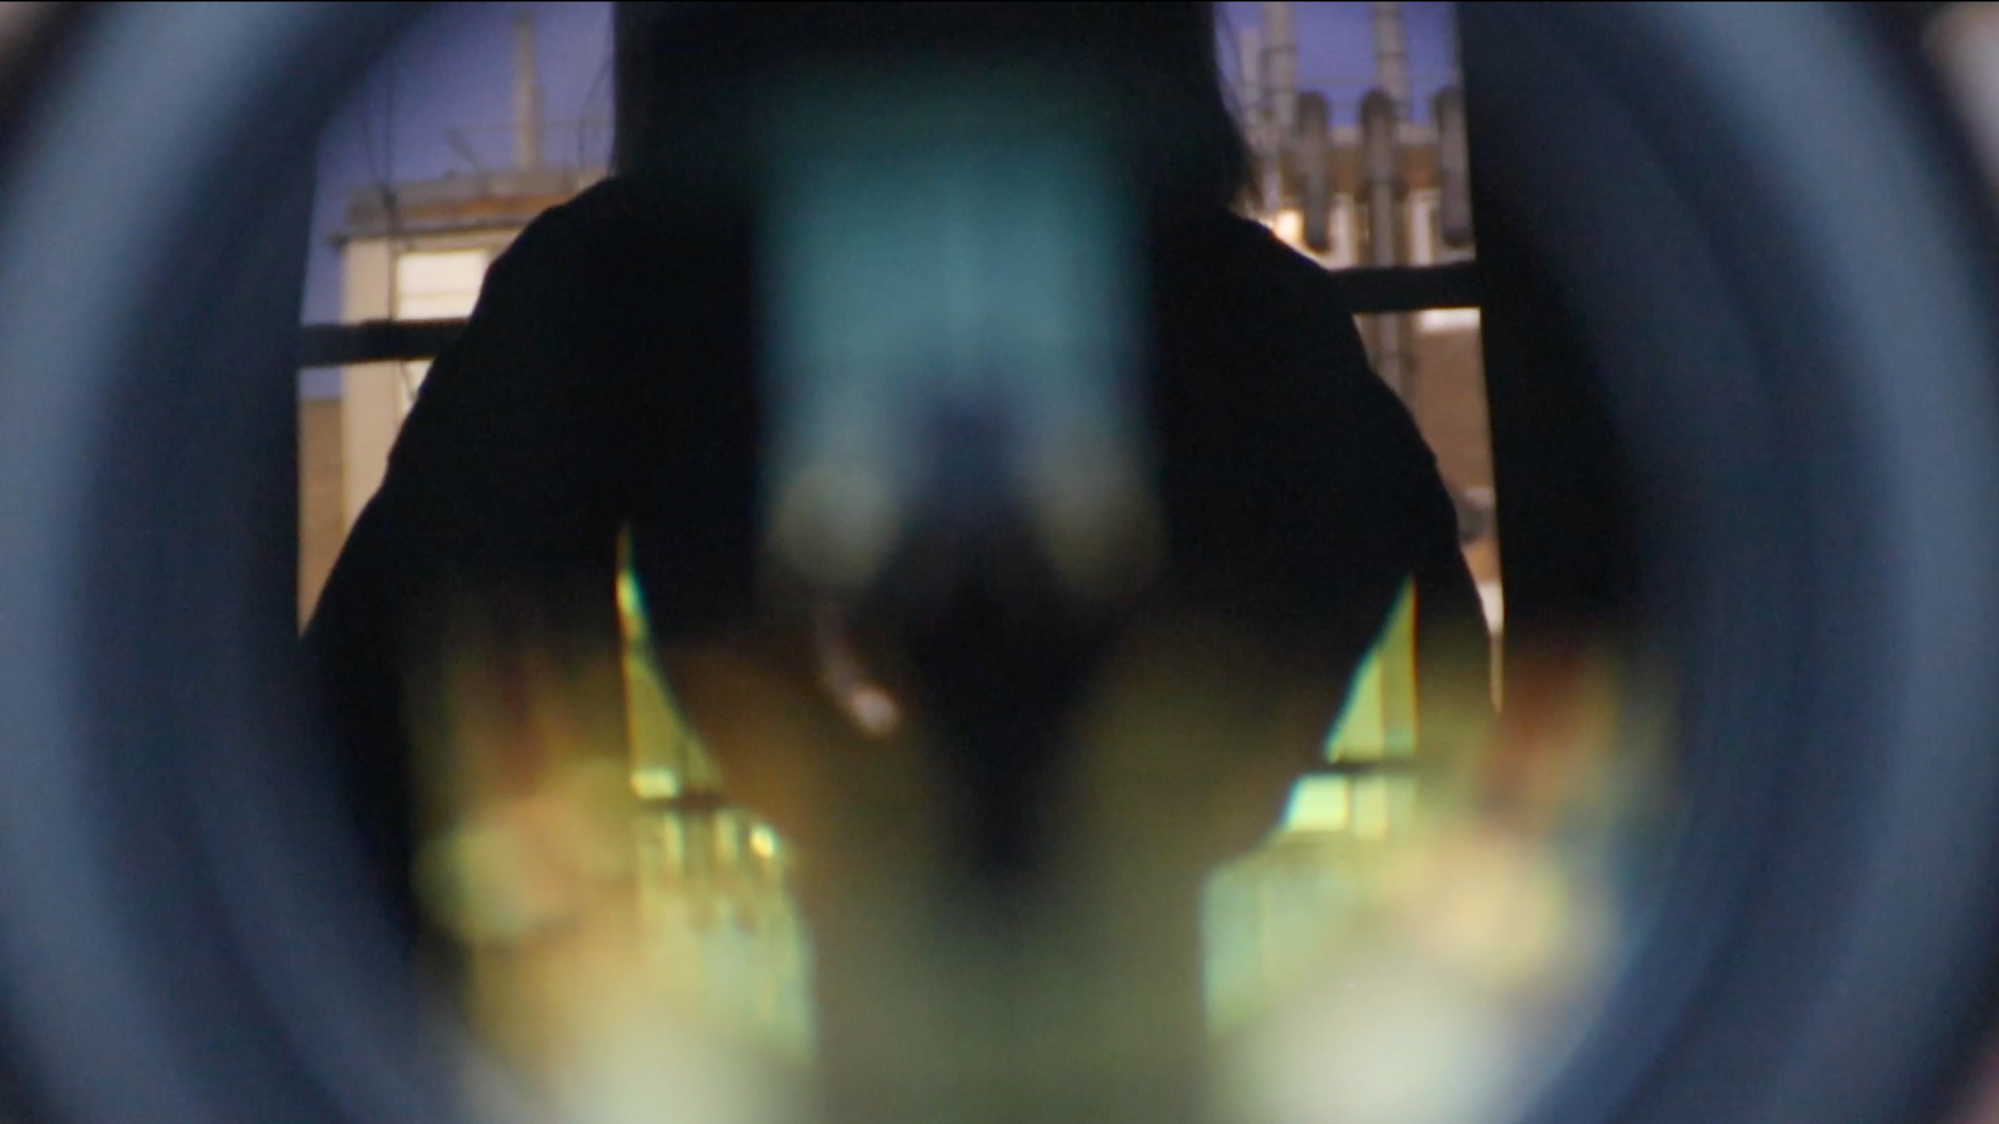 Still from "Kameroscope" (2021): the camera films a mirror, capturing a distortion of reality created by the reflection of the lens itself.